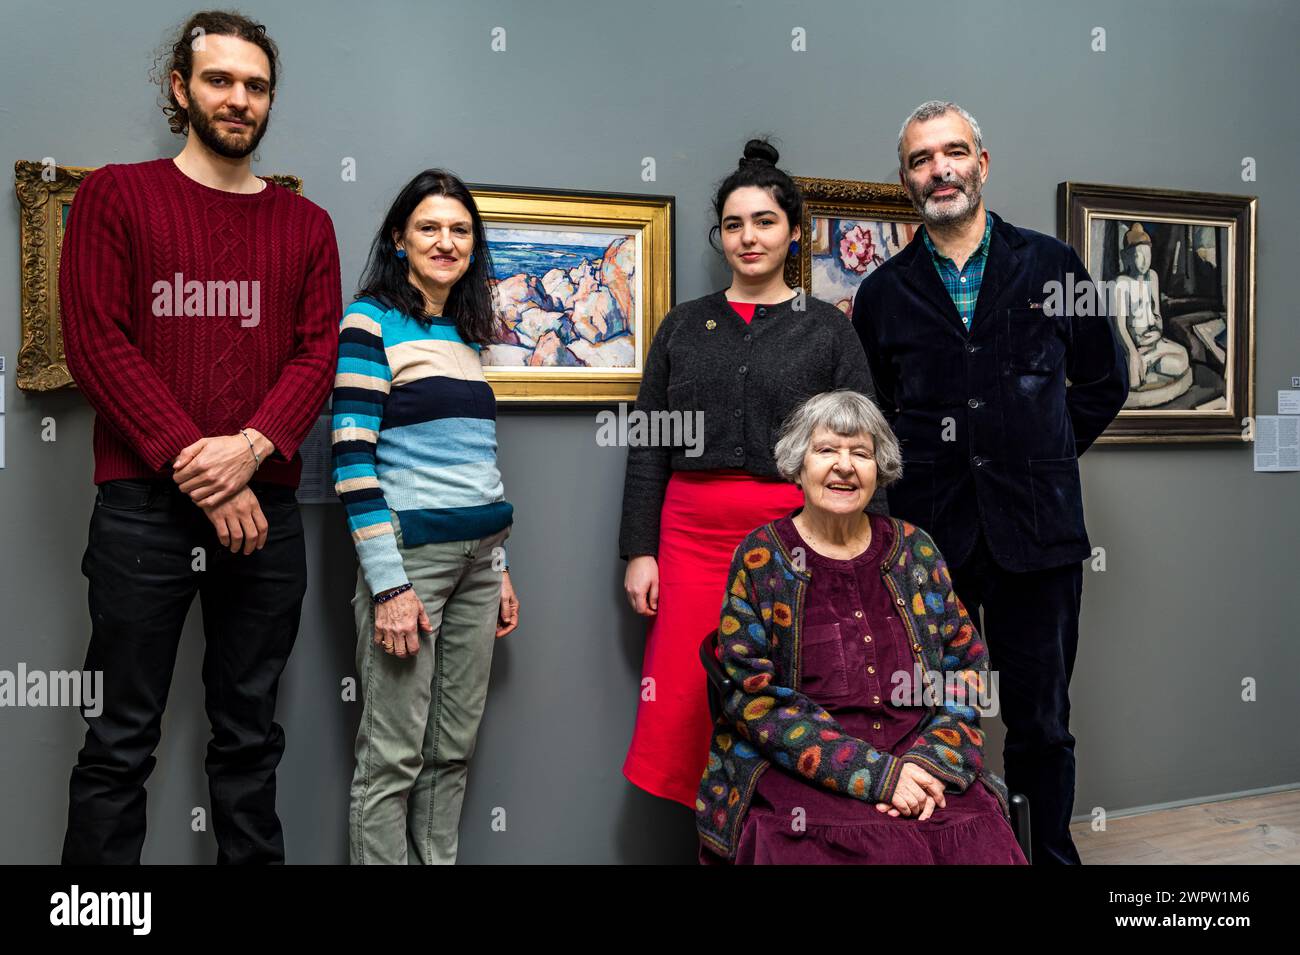 Edinburgh, Scotland, UK, 9th March 2024. The Scottish Gallery: a new exhibition at the New Town art gallery. A Legacy in Colour: The Peploe Family showcases work by Samuel J Peploe and 3 family members: his brother W.W. Peploe, his son Denis Peploe &  Clotilde Peploe (married to SJ's son Willy). Pictured: Mother & grandmother Elizabeth Peploe (seated, wife of Denis Peploe) (L-R) Denis Iannoukos, his mother Lucy Peploe (sister to Guy), Iris Peploe & Guy Peploe (granddaughter and son of Elizabeth). Credit: Sally Anderson/Alamy Live News Stock Photo